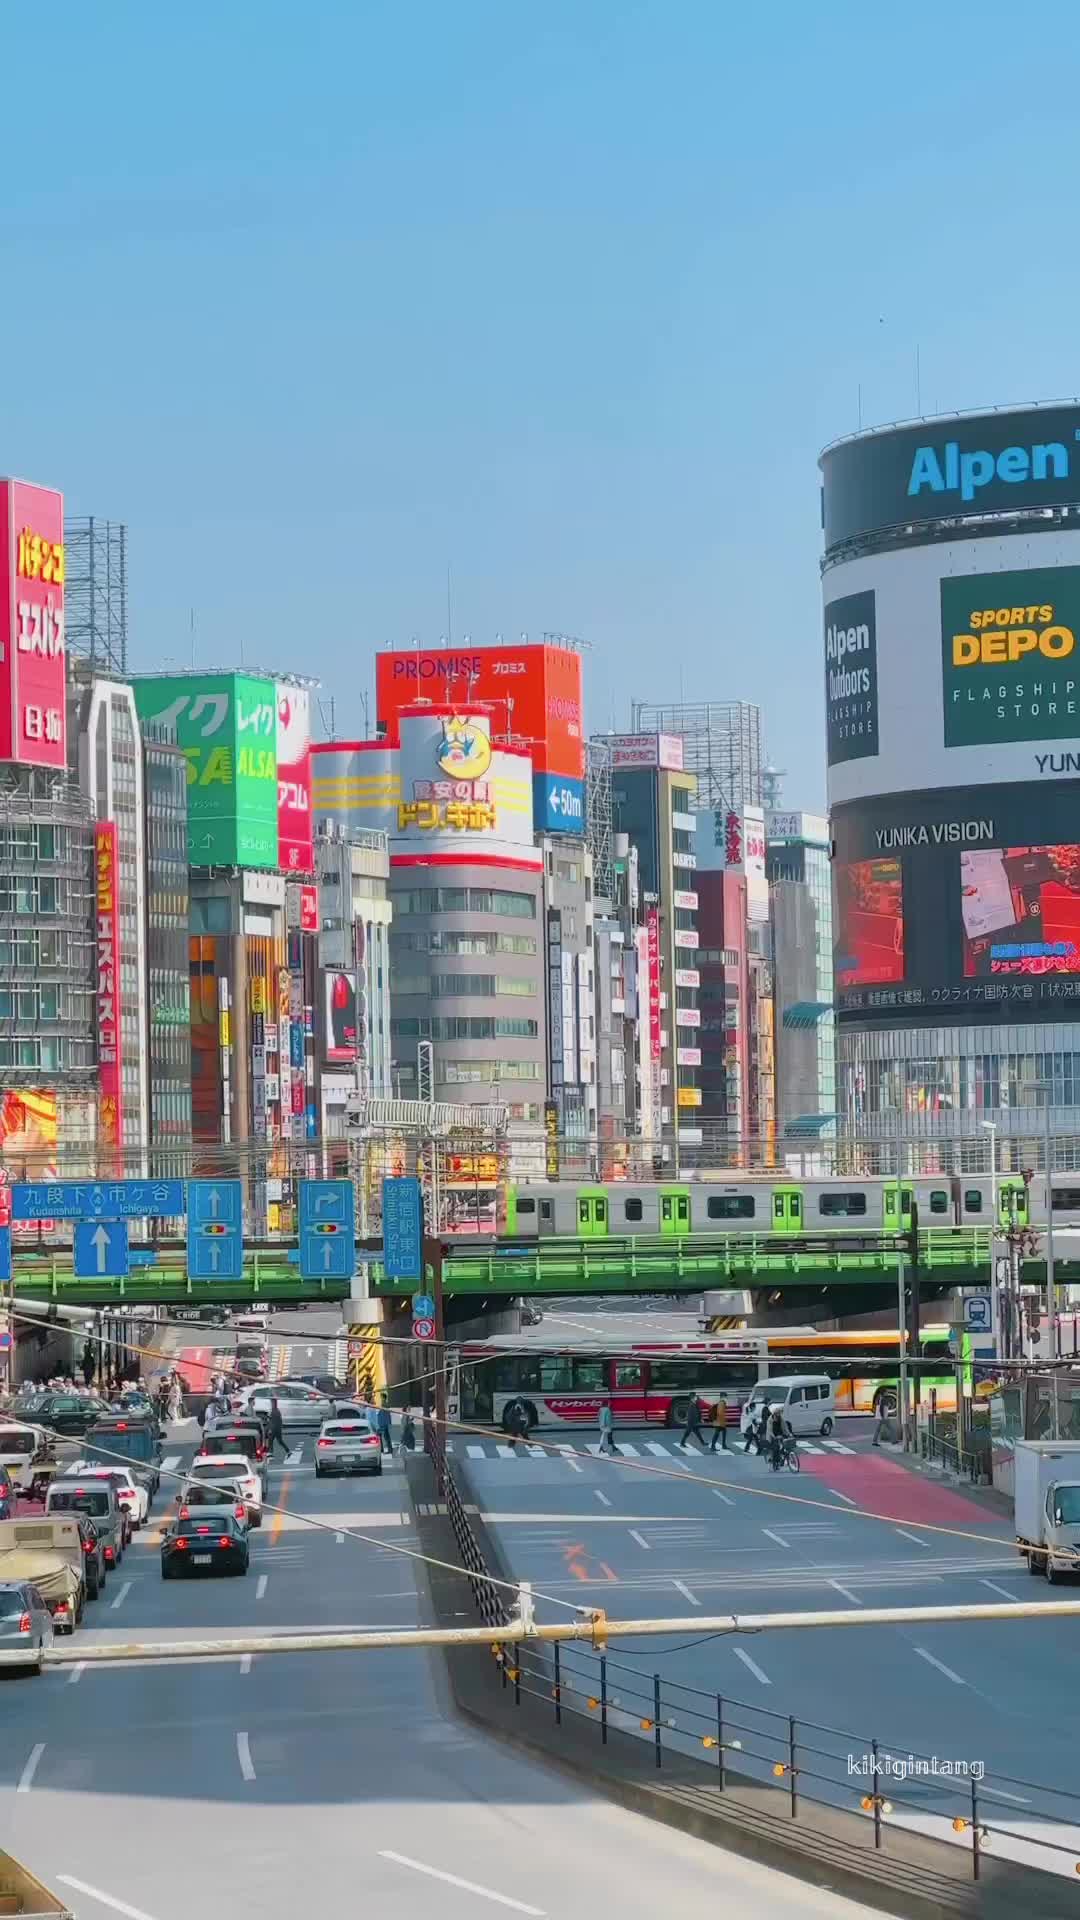 Ready to Travel to Japan This Year?